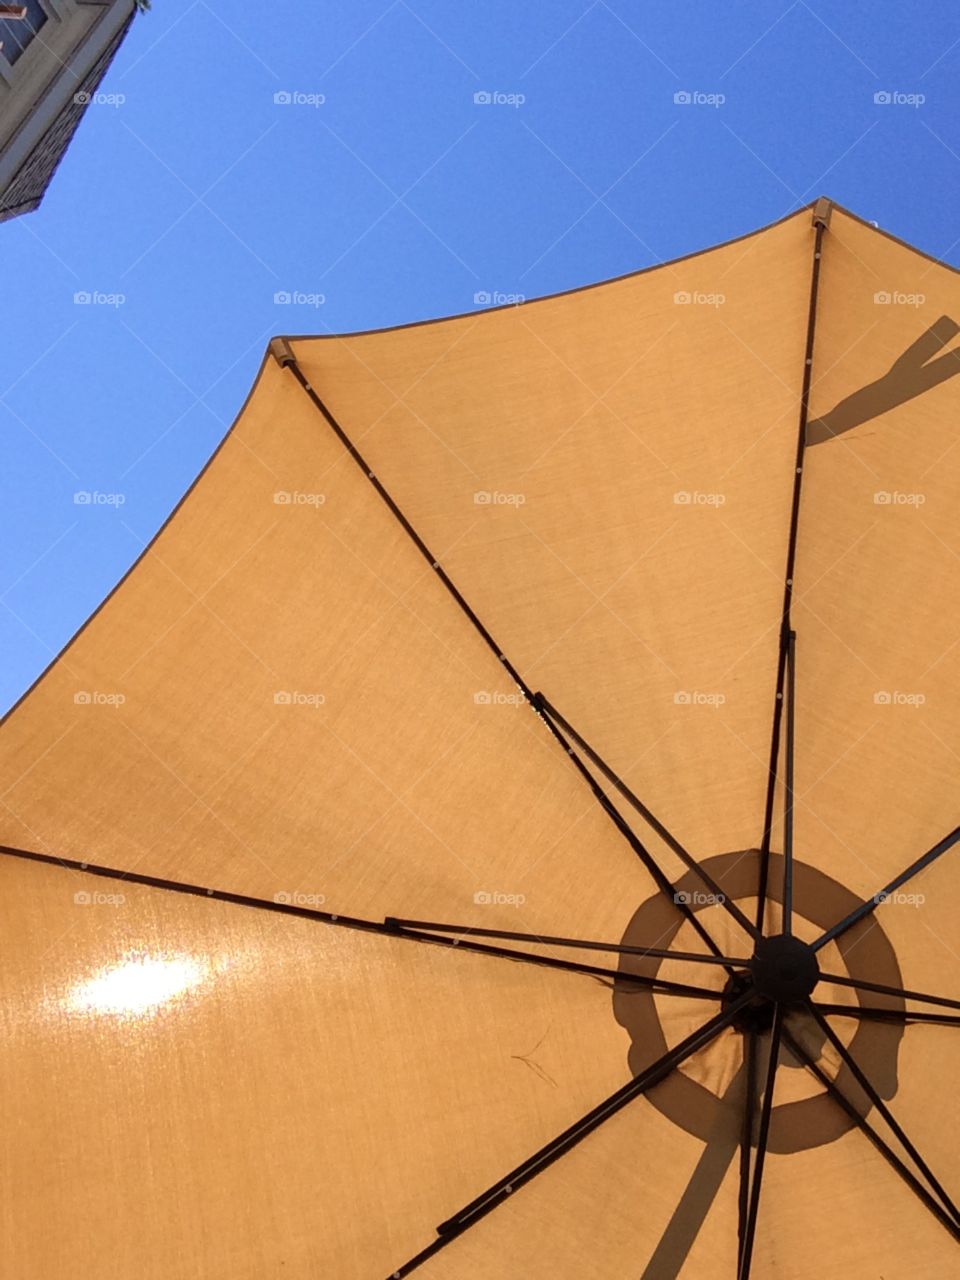 Throwin' Shade. Large umbrella near the pool provides a shady spot to sit and enjoy this beautiful late summer NC day. 